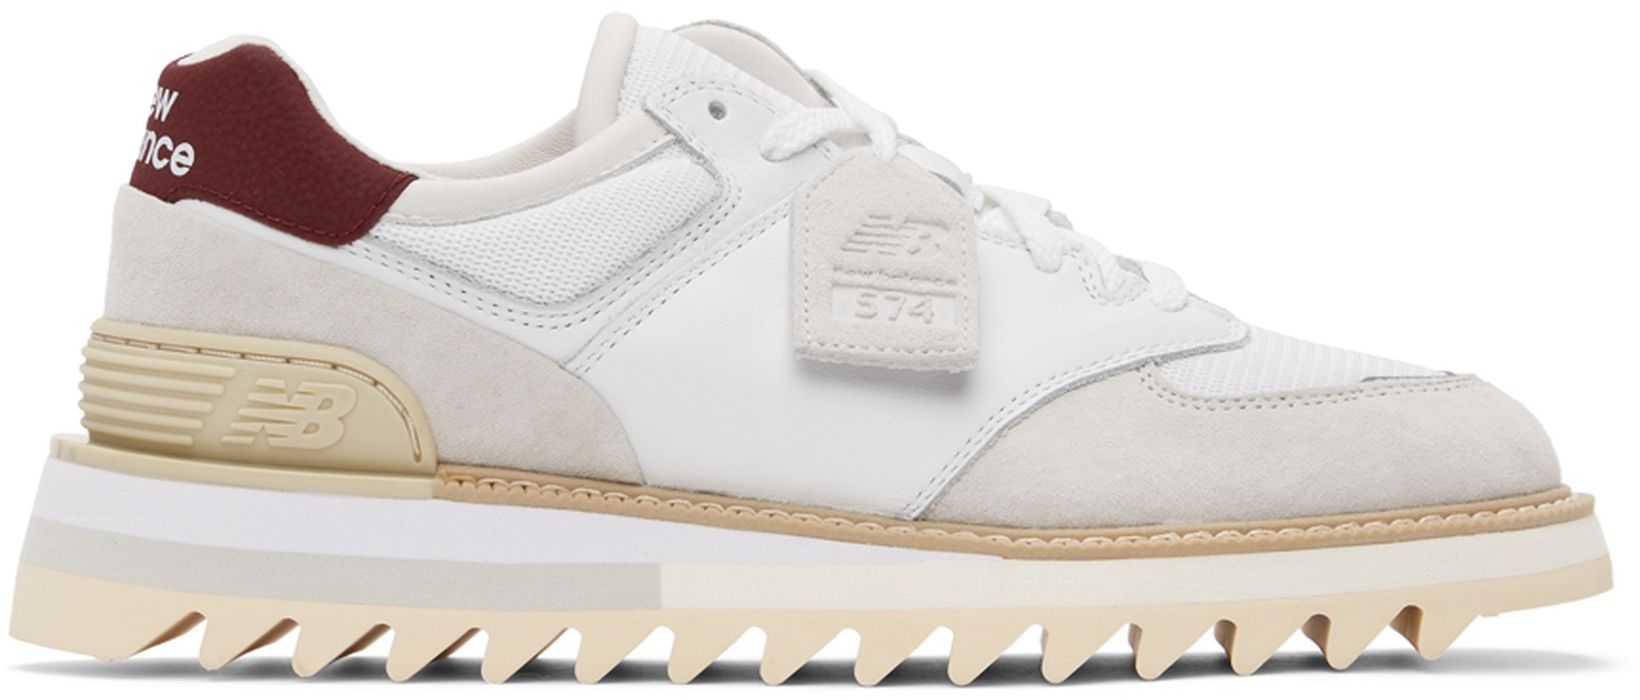 New Balance White TDS Edition 574 Sneakers